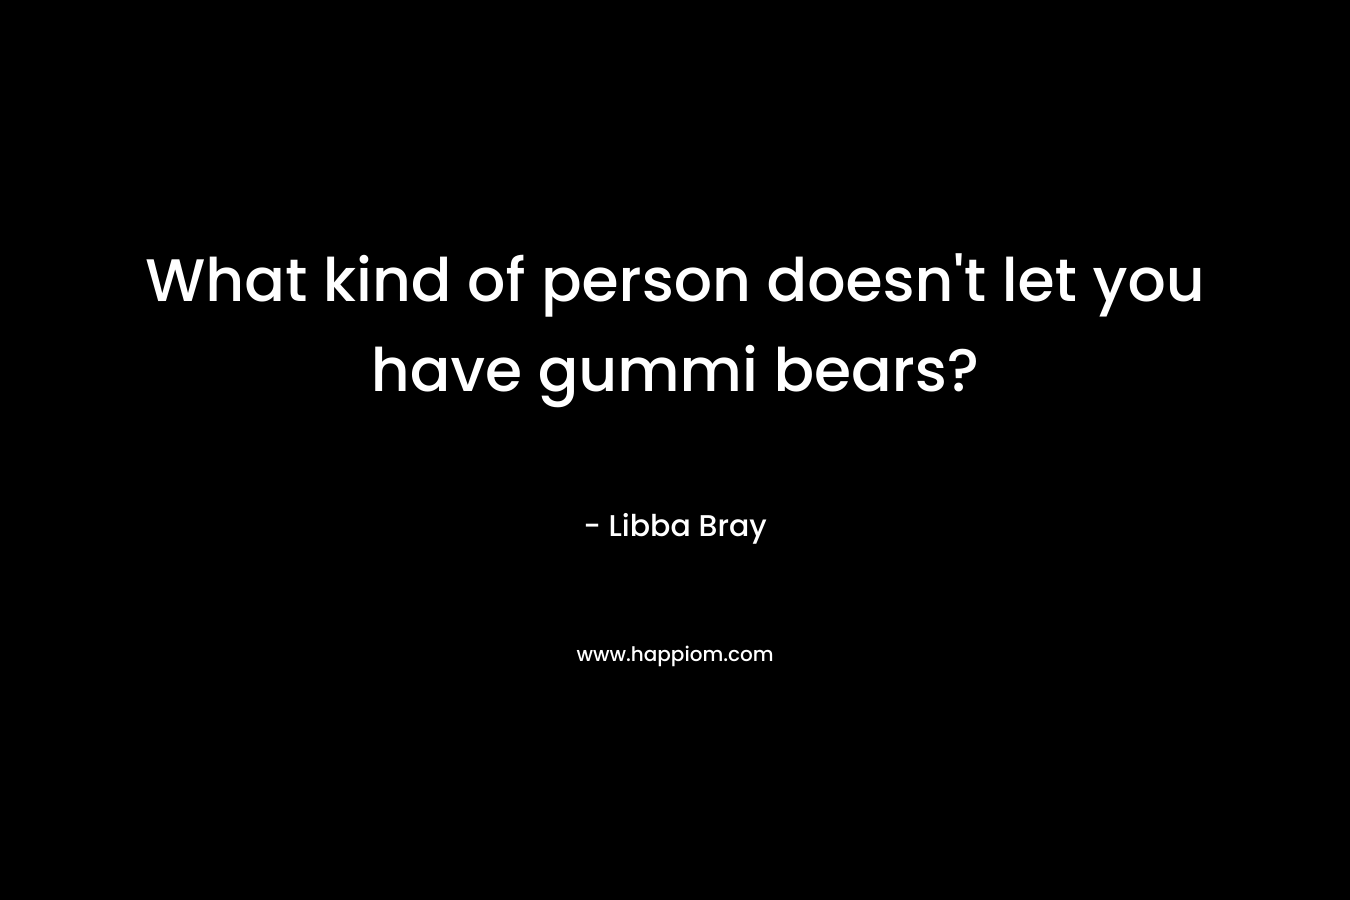 What kind of person doesn't let you have gummi bears?